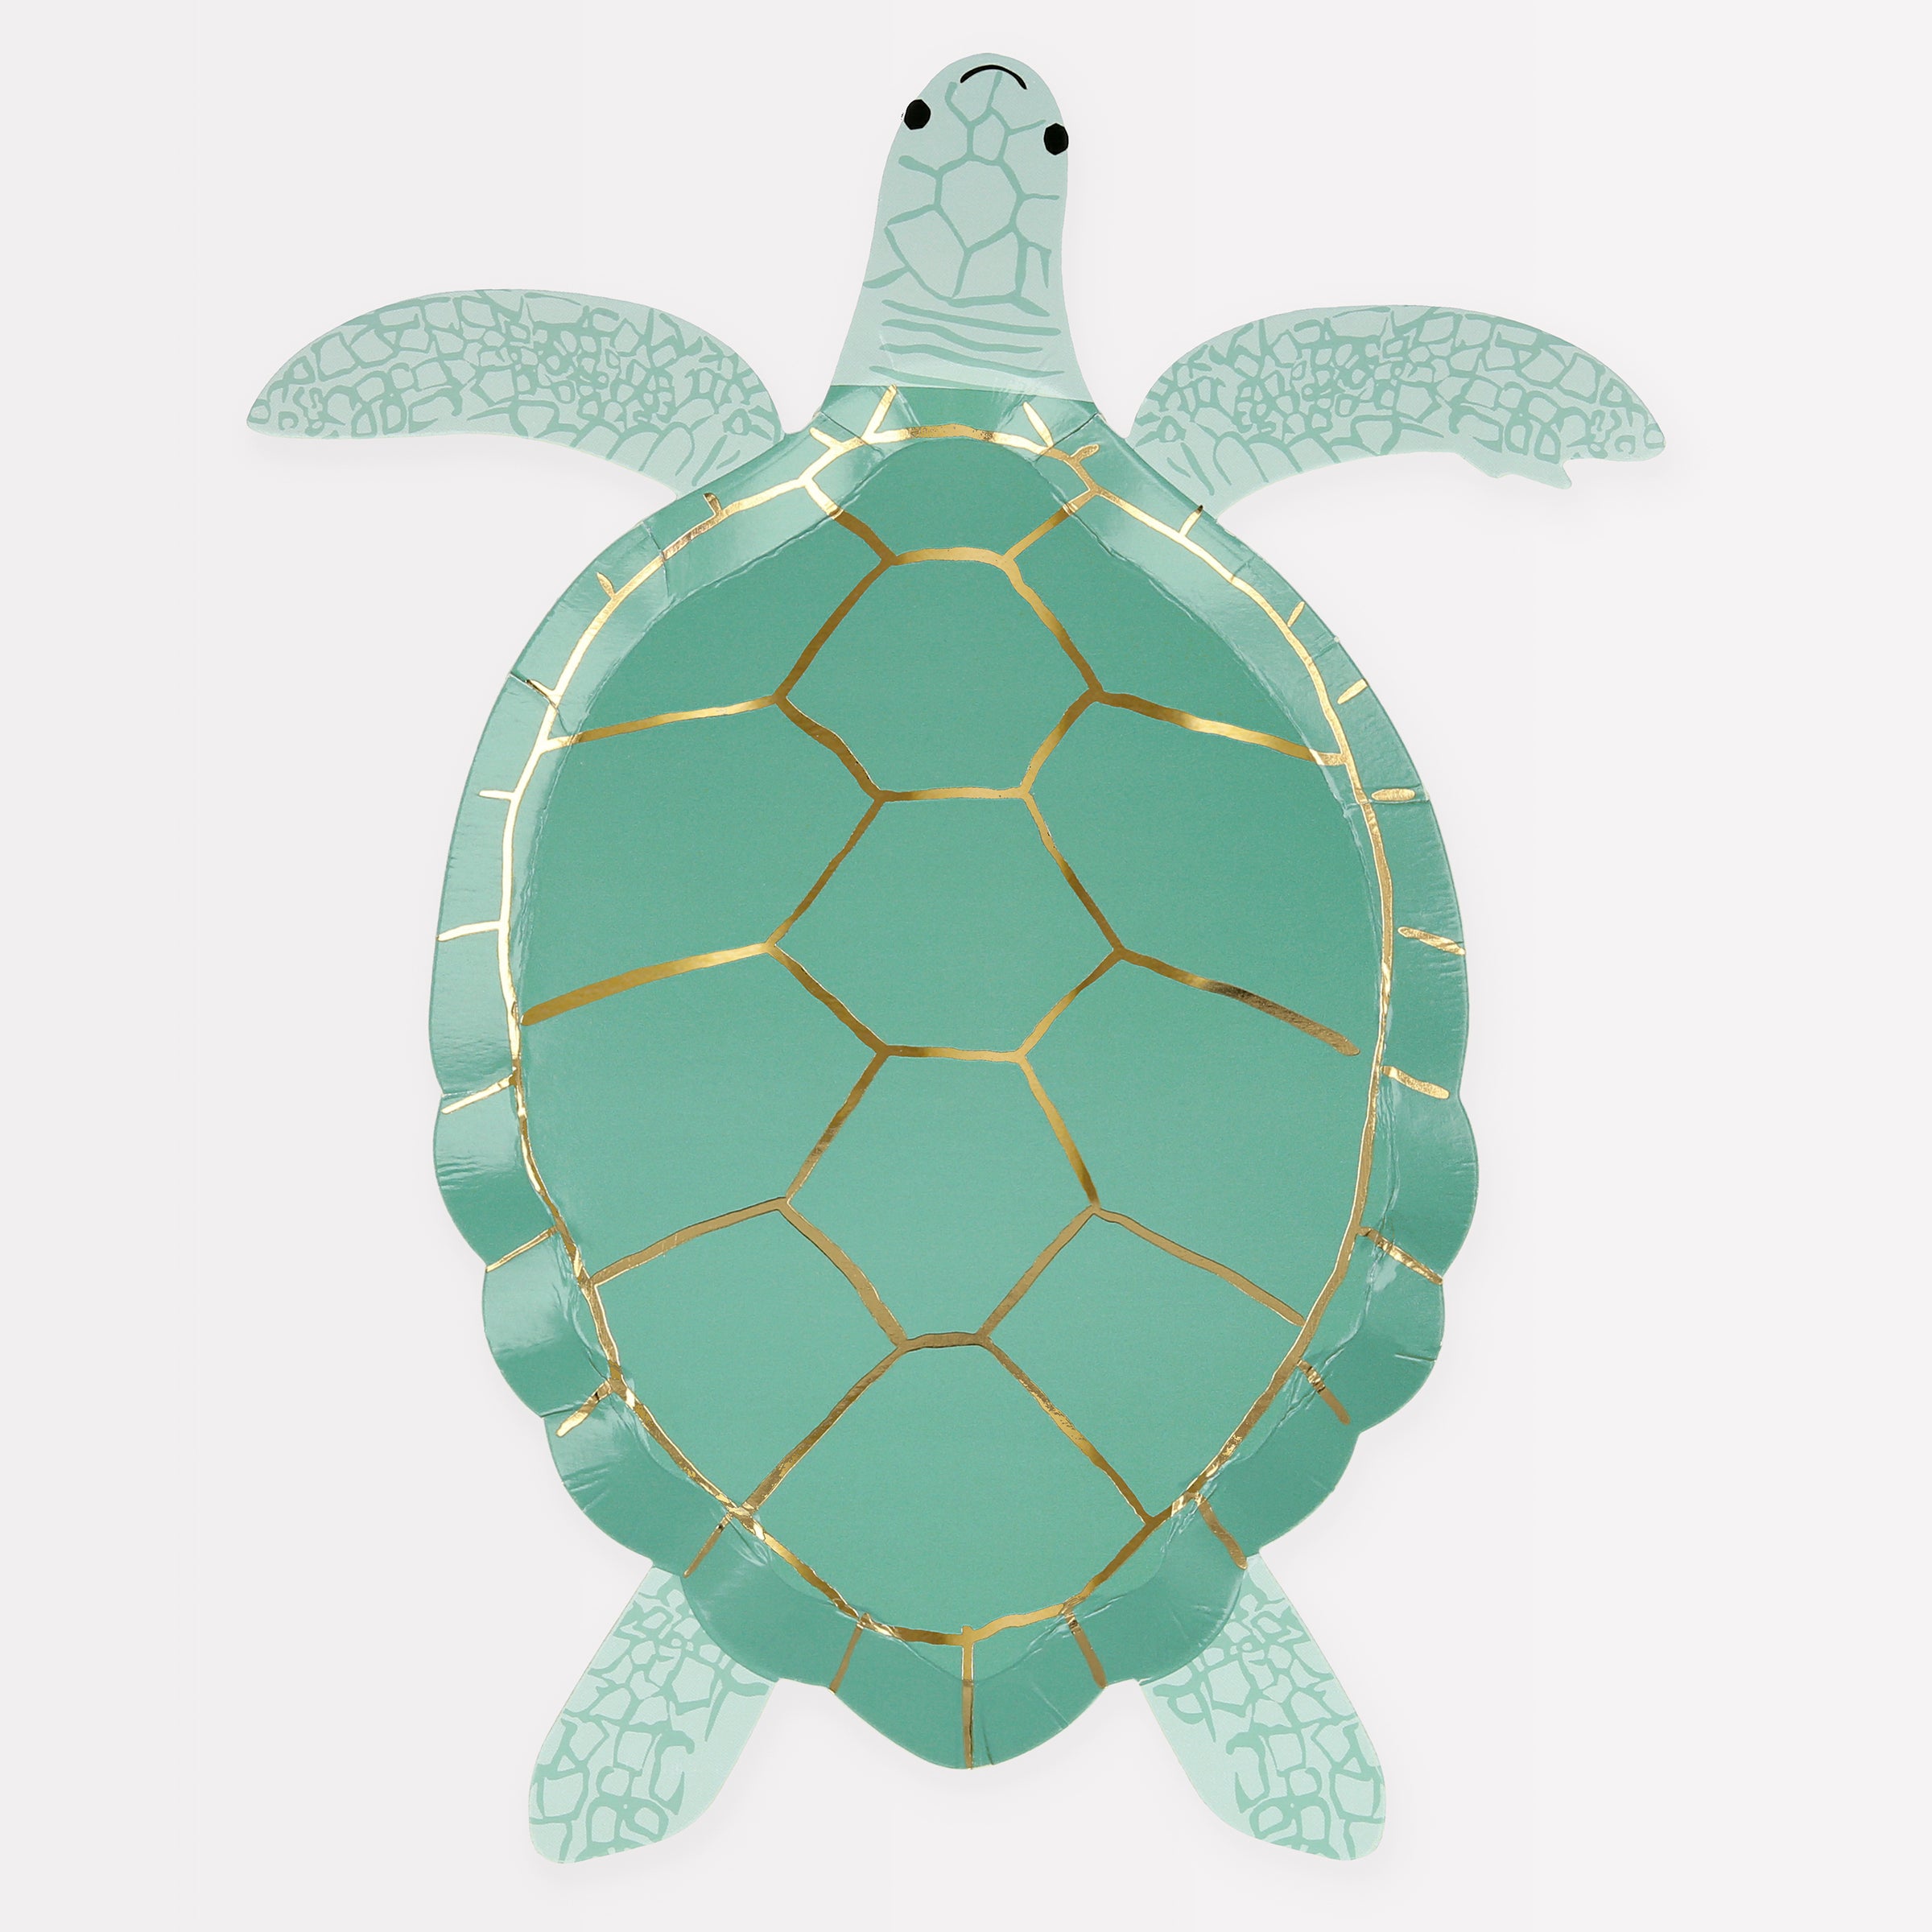 Our paper plates are cut in the shape of a turtle and are perfect for under-the-sea themed parties.